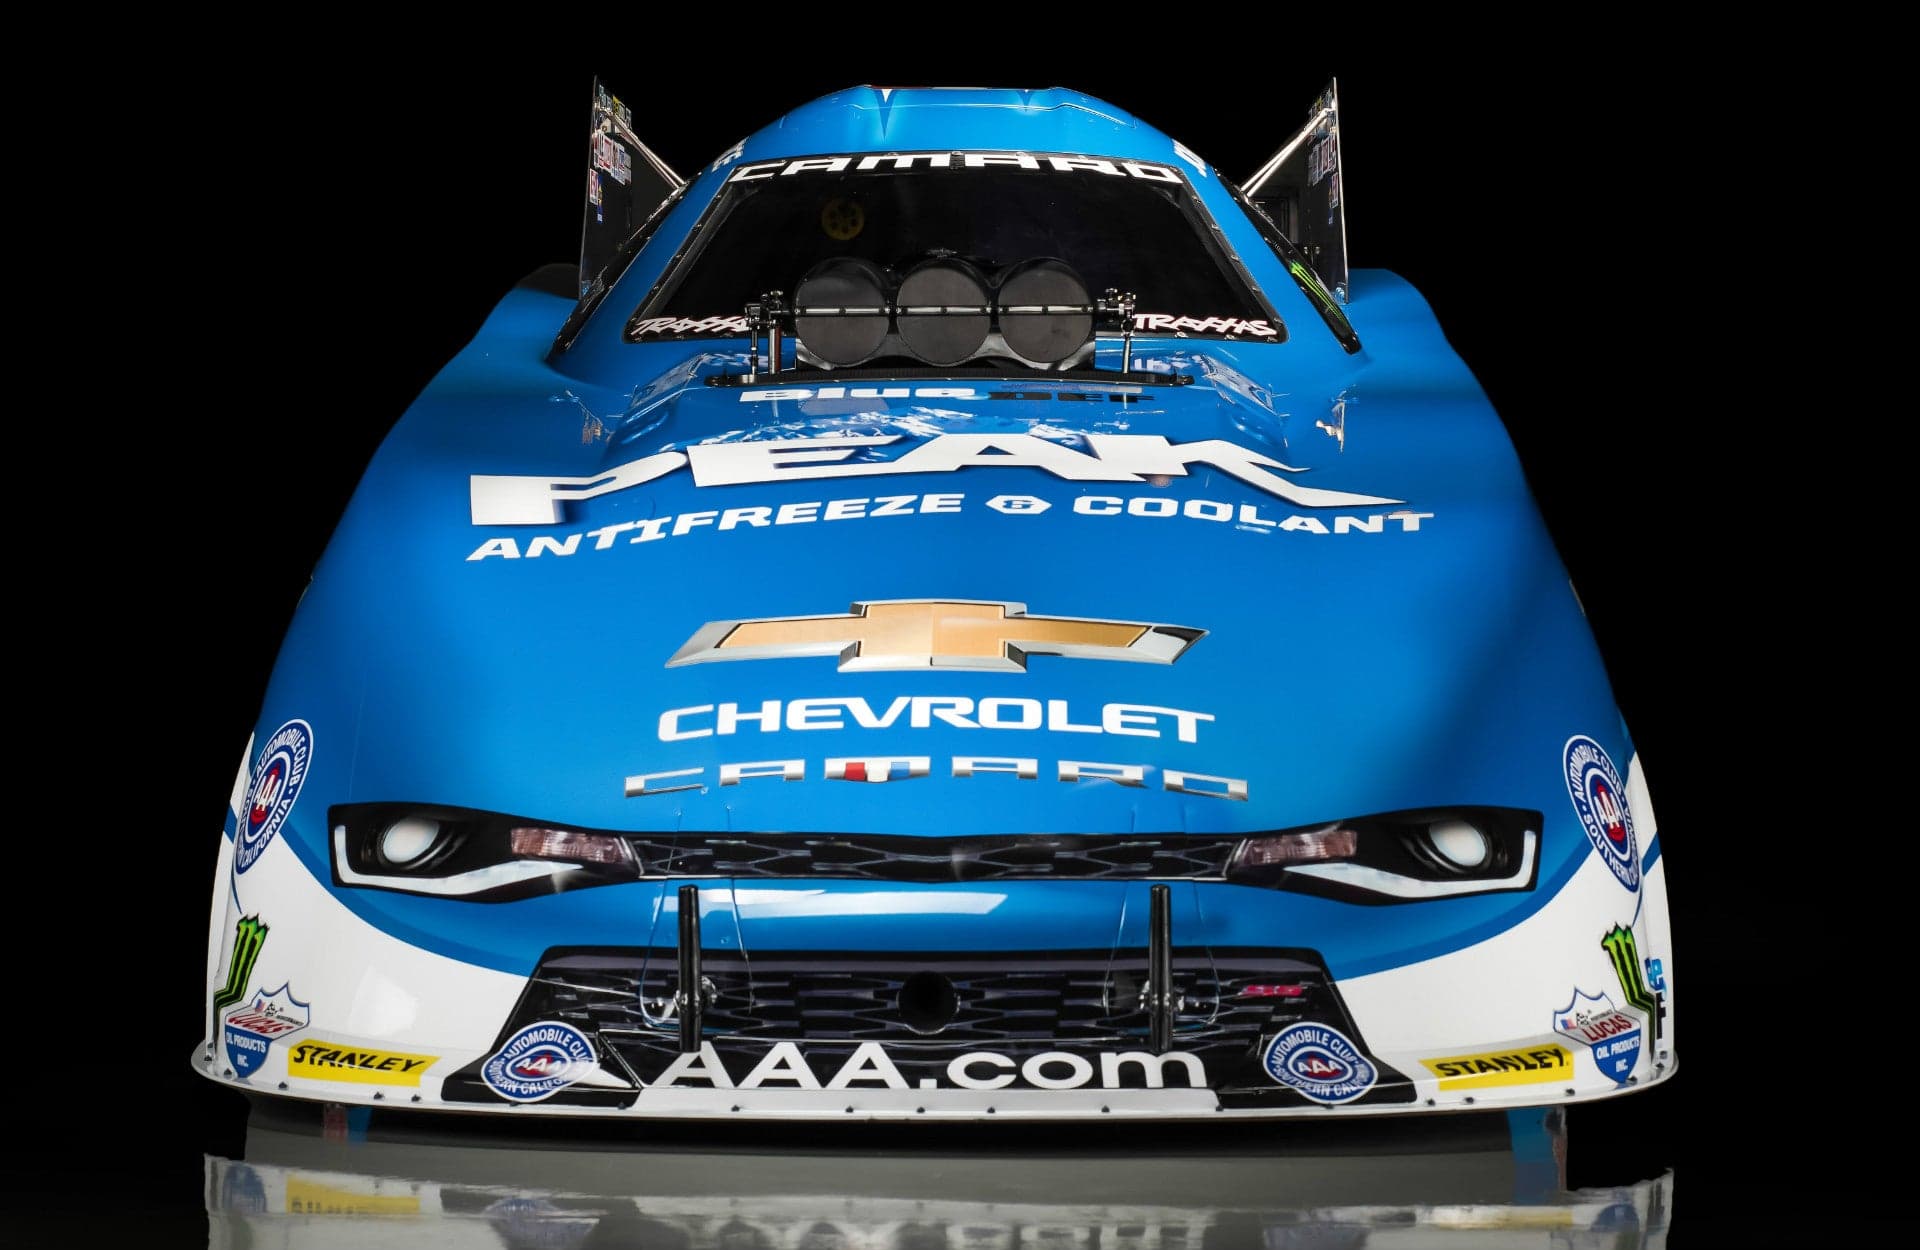 Meet the New Chevy Camaro SS Funny Car